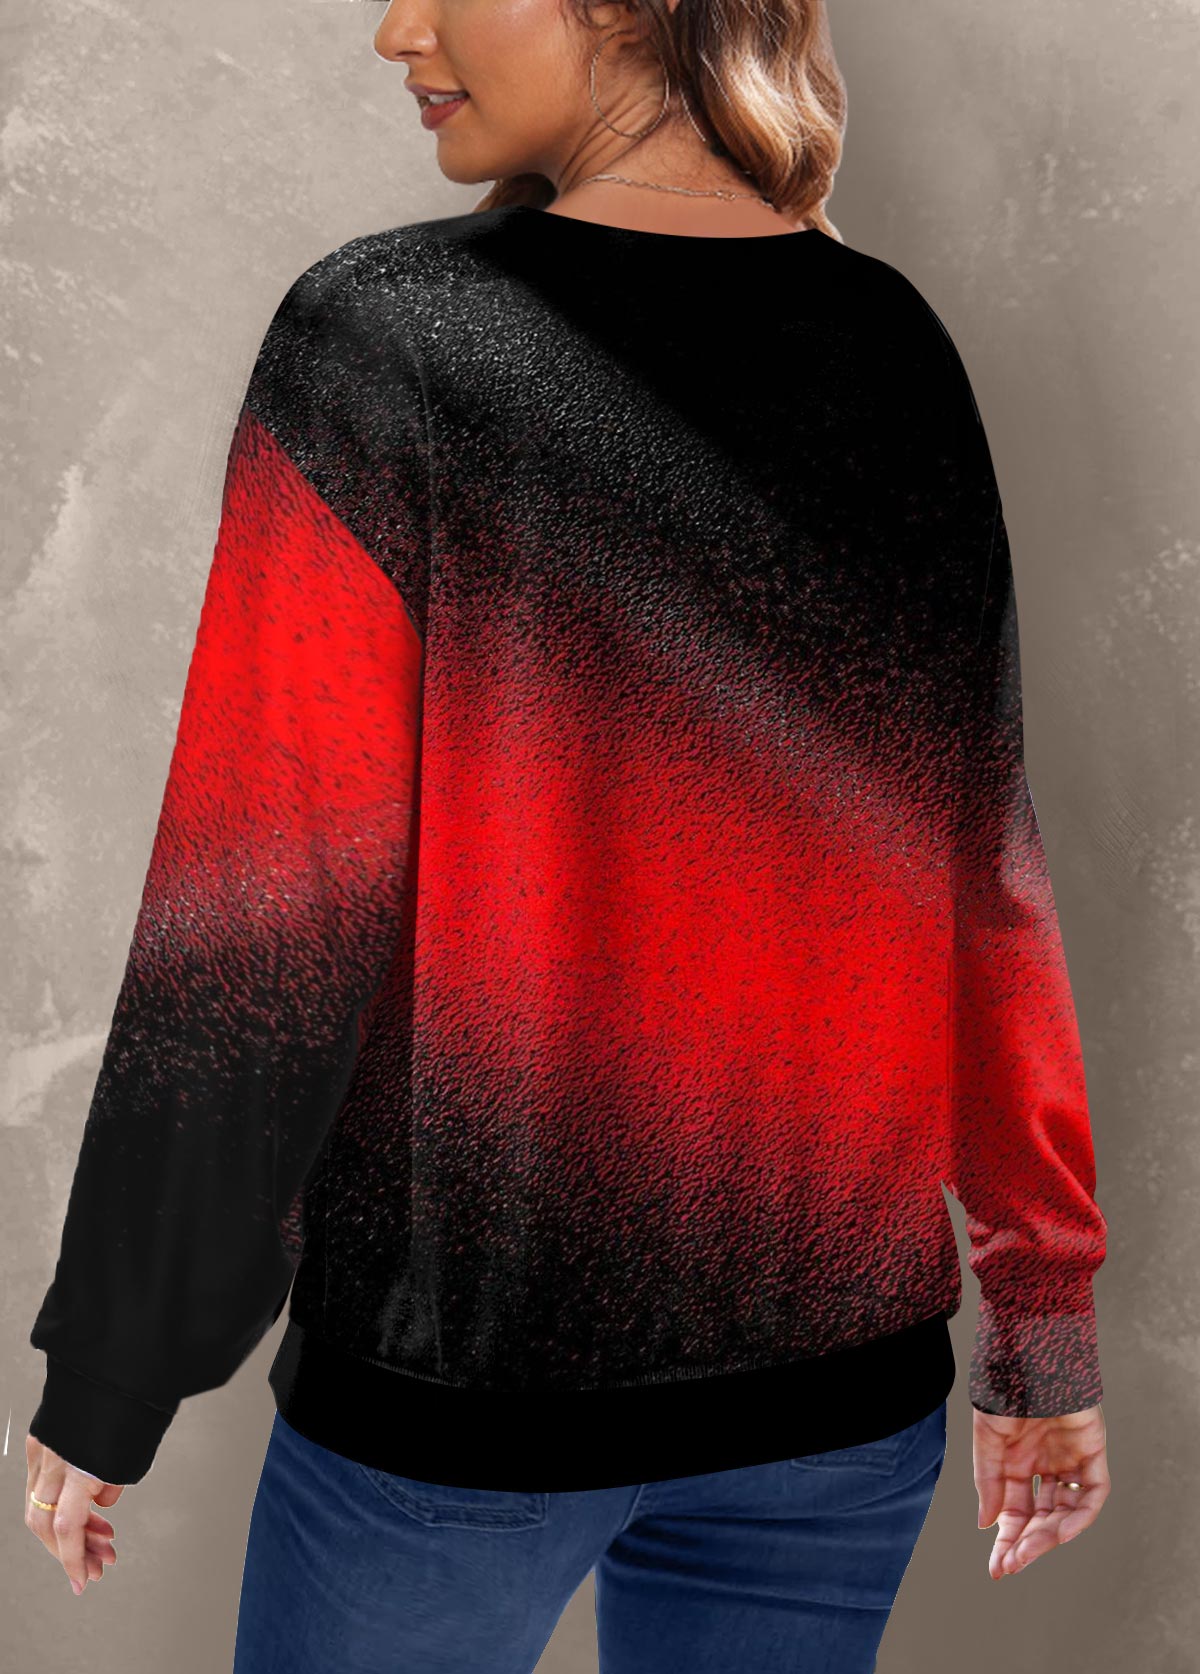 Red Ombre Long Sleeve Round Neck Sweatshirt